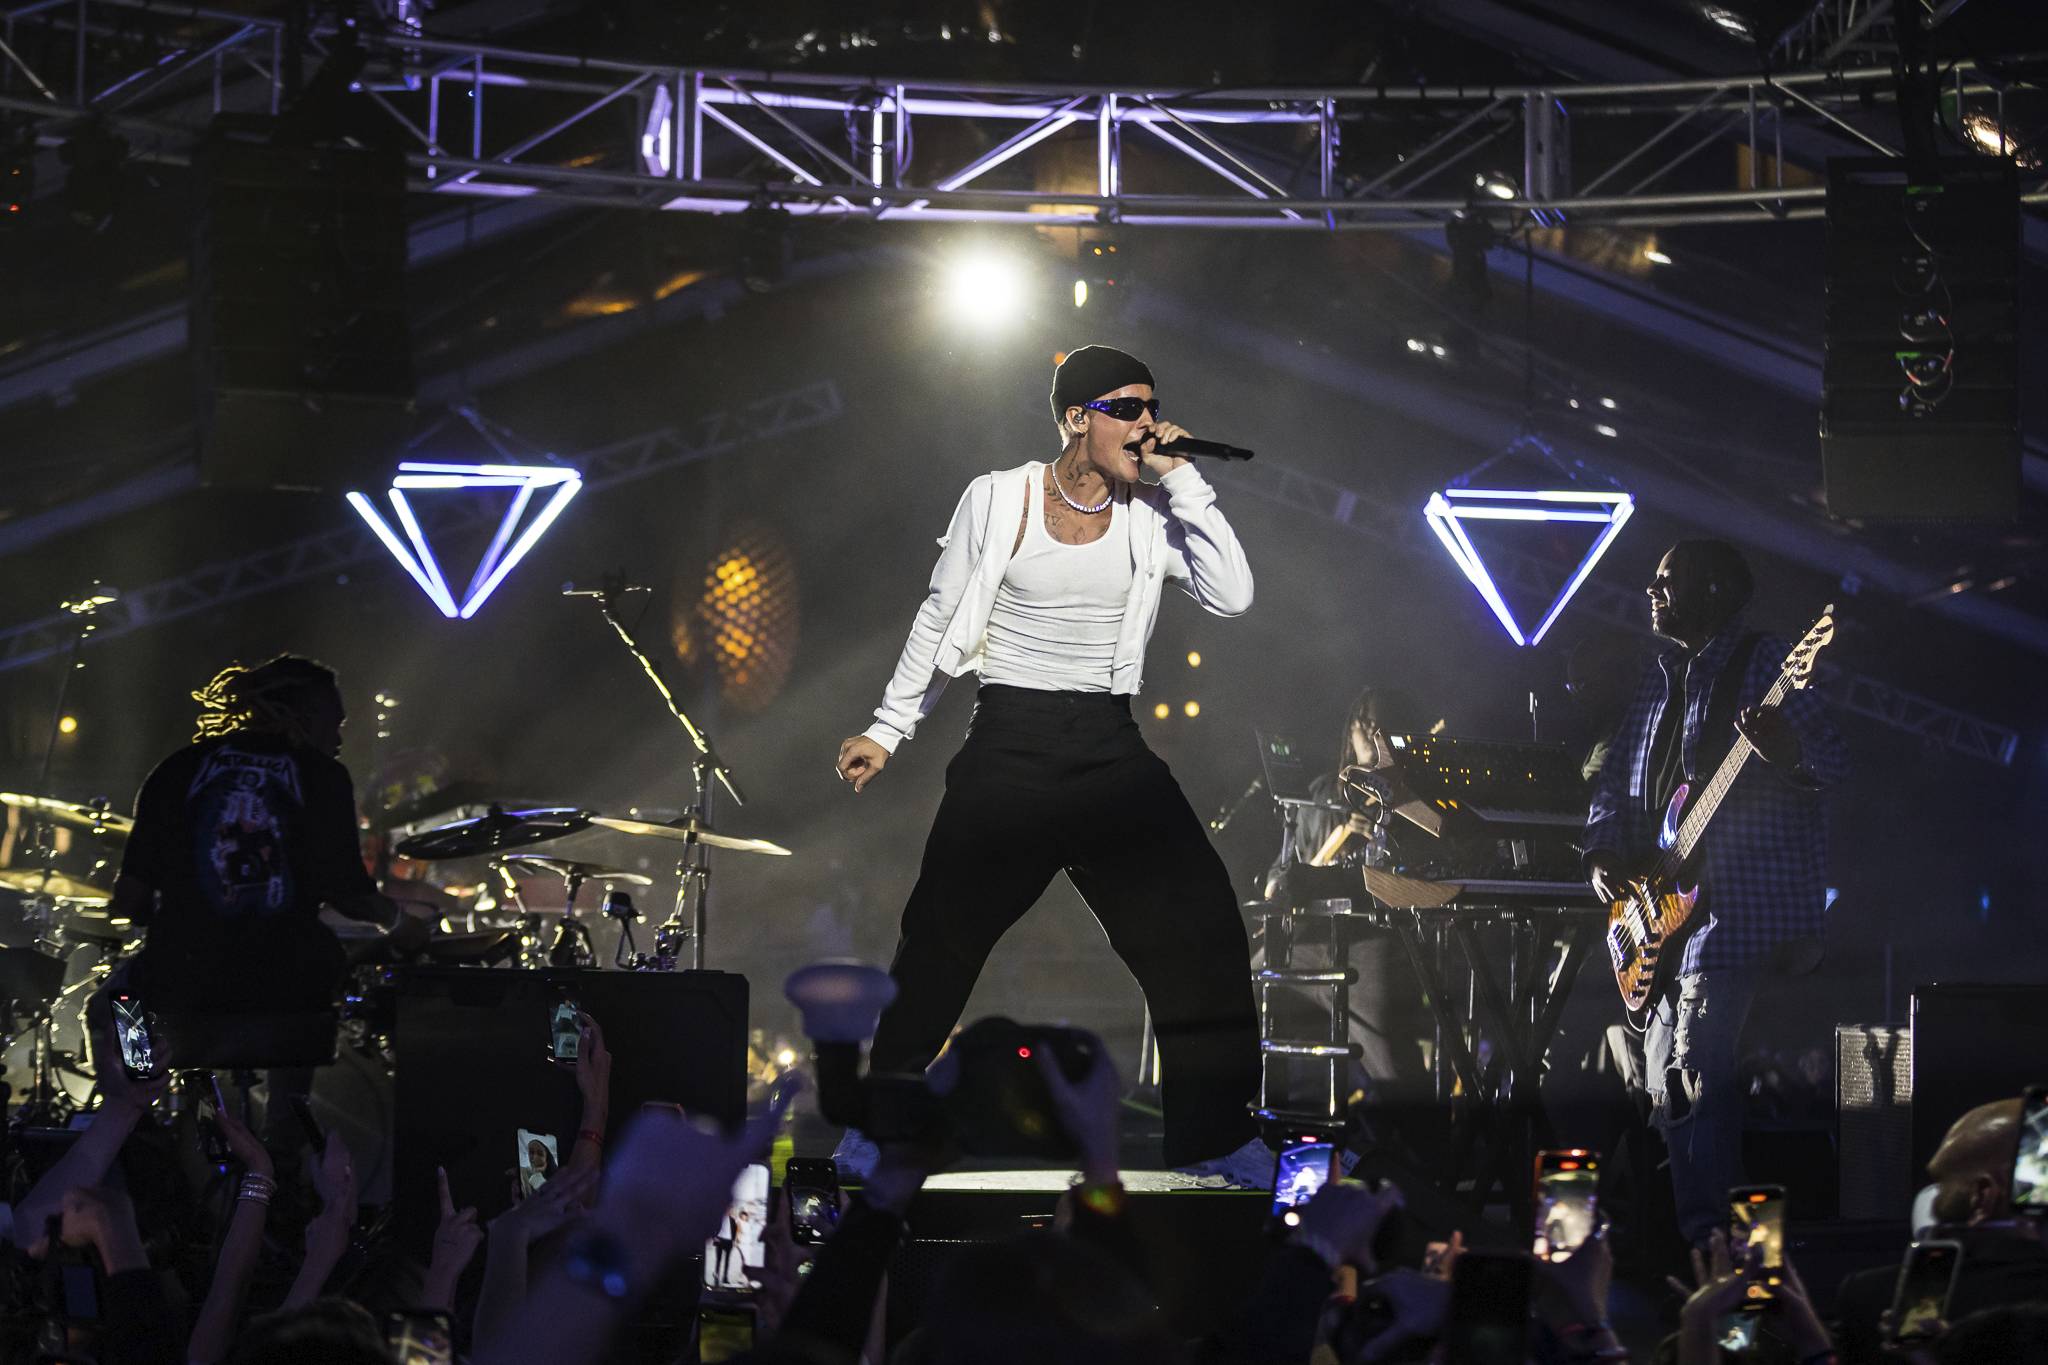 Justin Bieber performing at Uncommon Event's Super Bowl 2022 event in Los Angeles